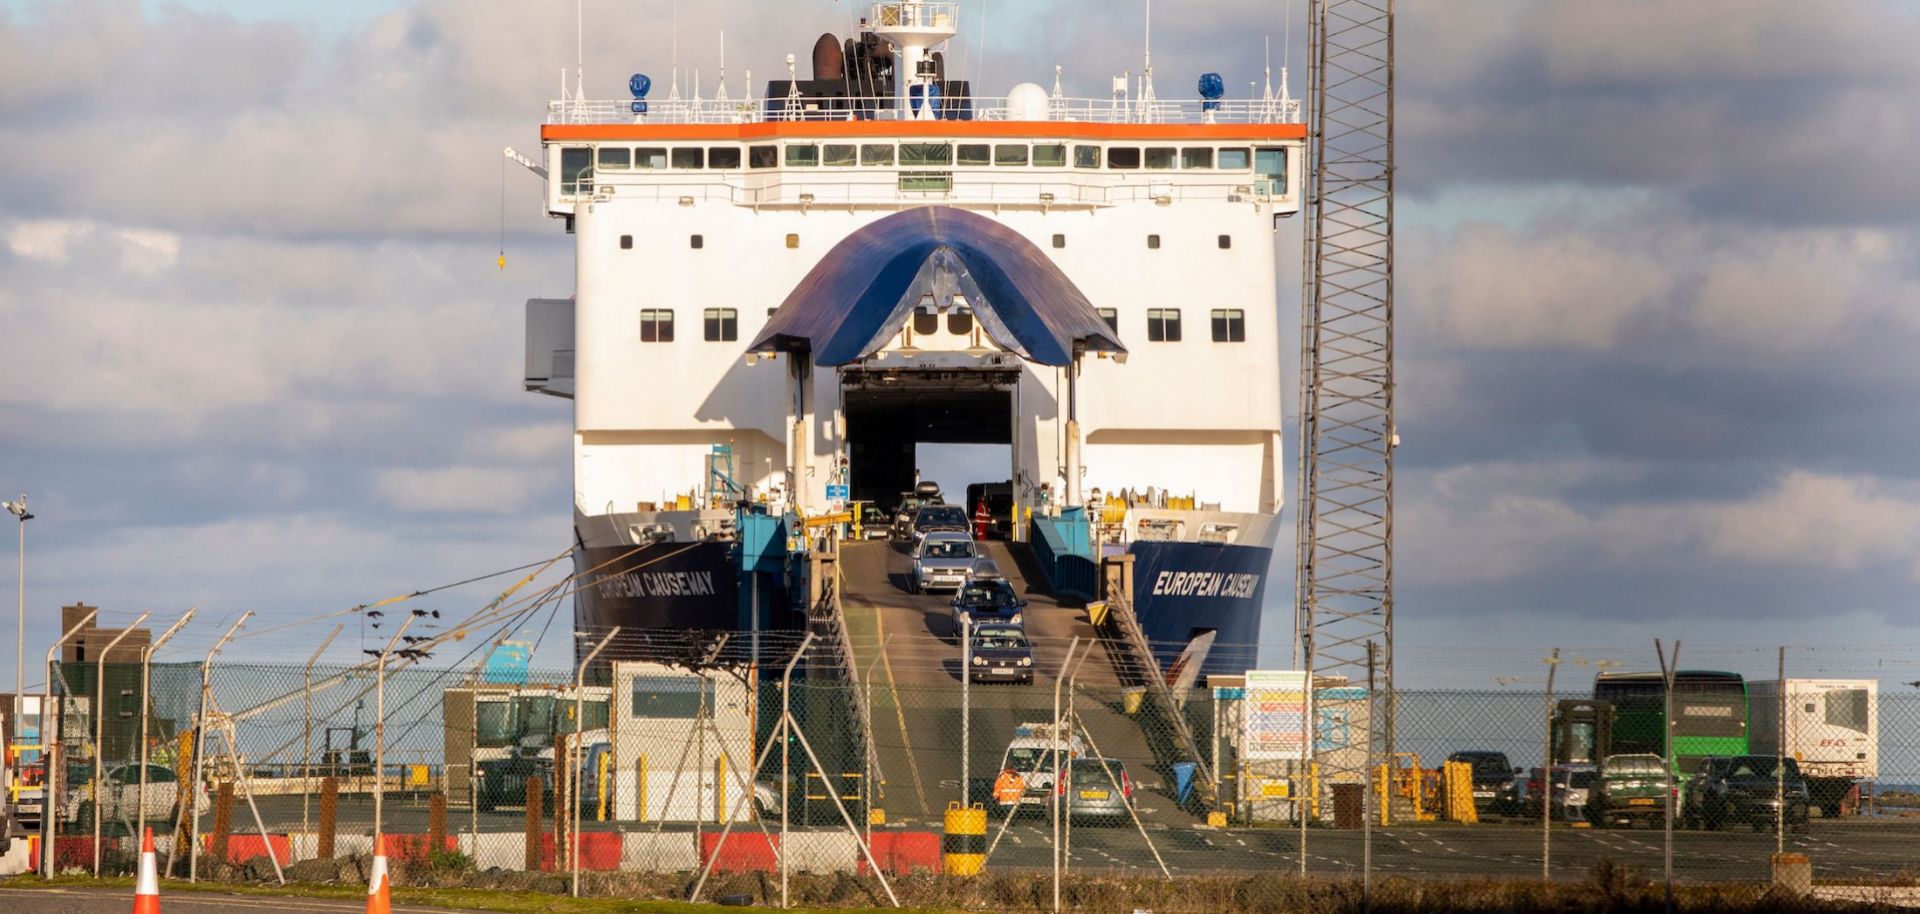 Vehicles drive off a ferry at the Port of Larne in Northern Ireland on Dec. 6, 2020. The port, which handles travel and freight from Scotland, is expected to be building a new Border Control Post (BCP) as a consequence of Brexit. 